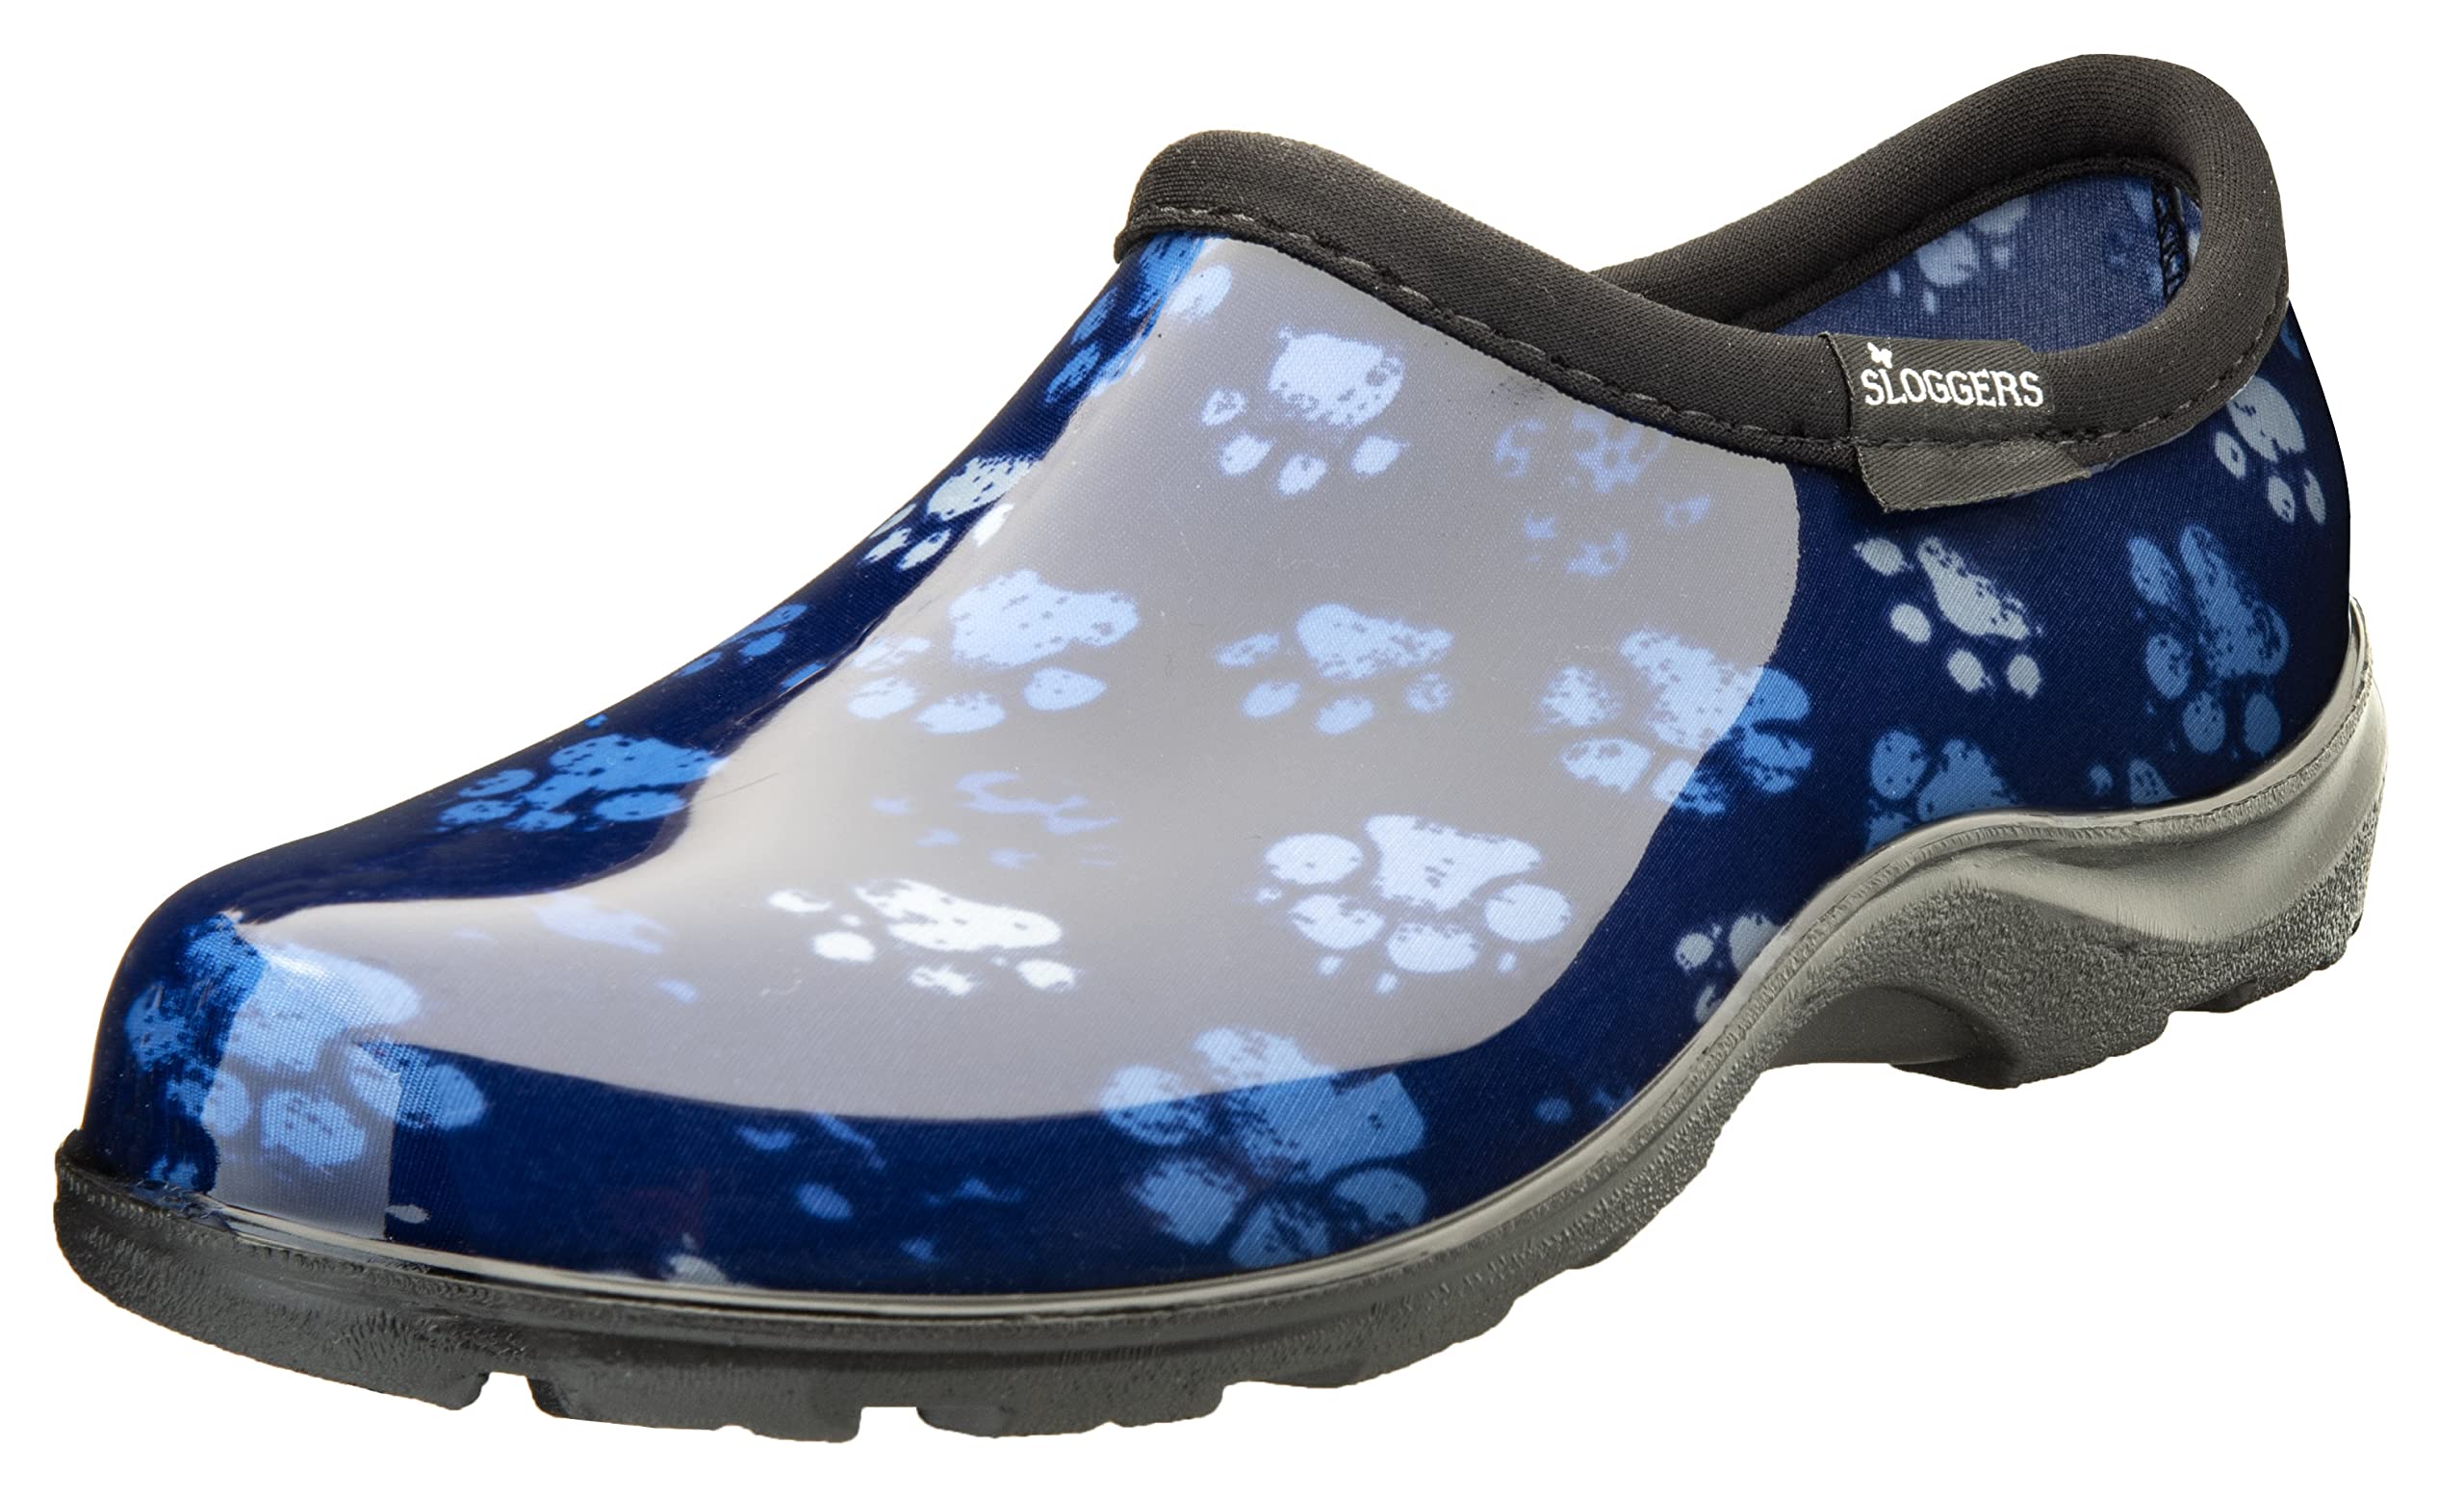 Sloggers Waterproof Garden Shoe for Women – Outdoor Slip-On Rain and Garden Clogs with Premium Comfort Support Insole 8 Grungy Paw Print Blue